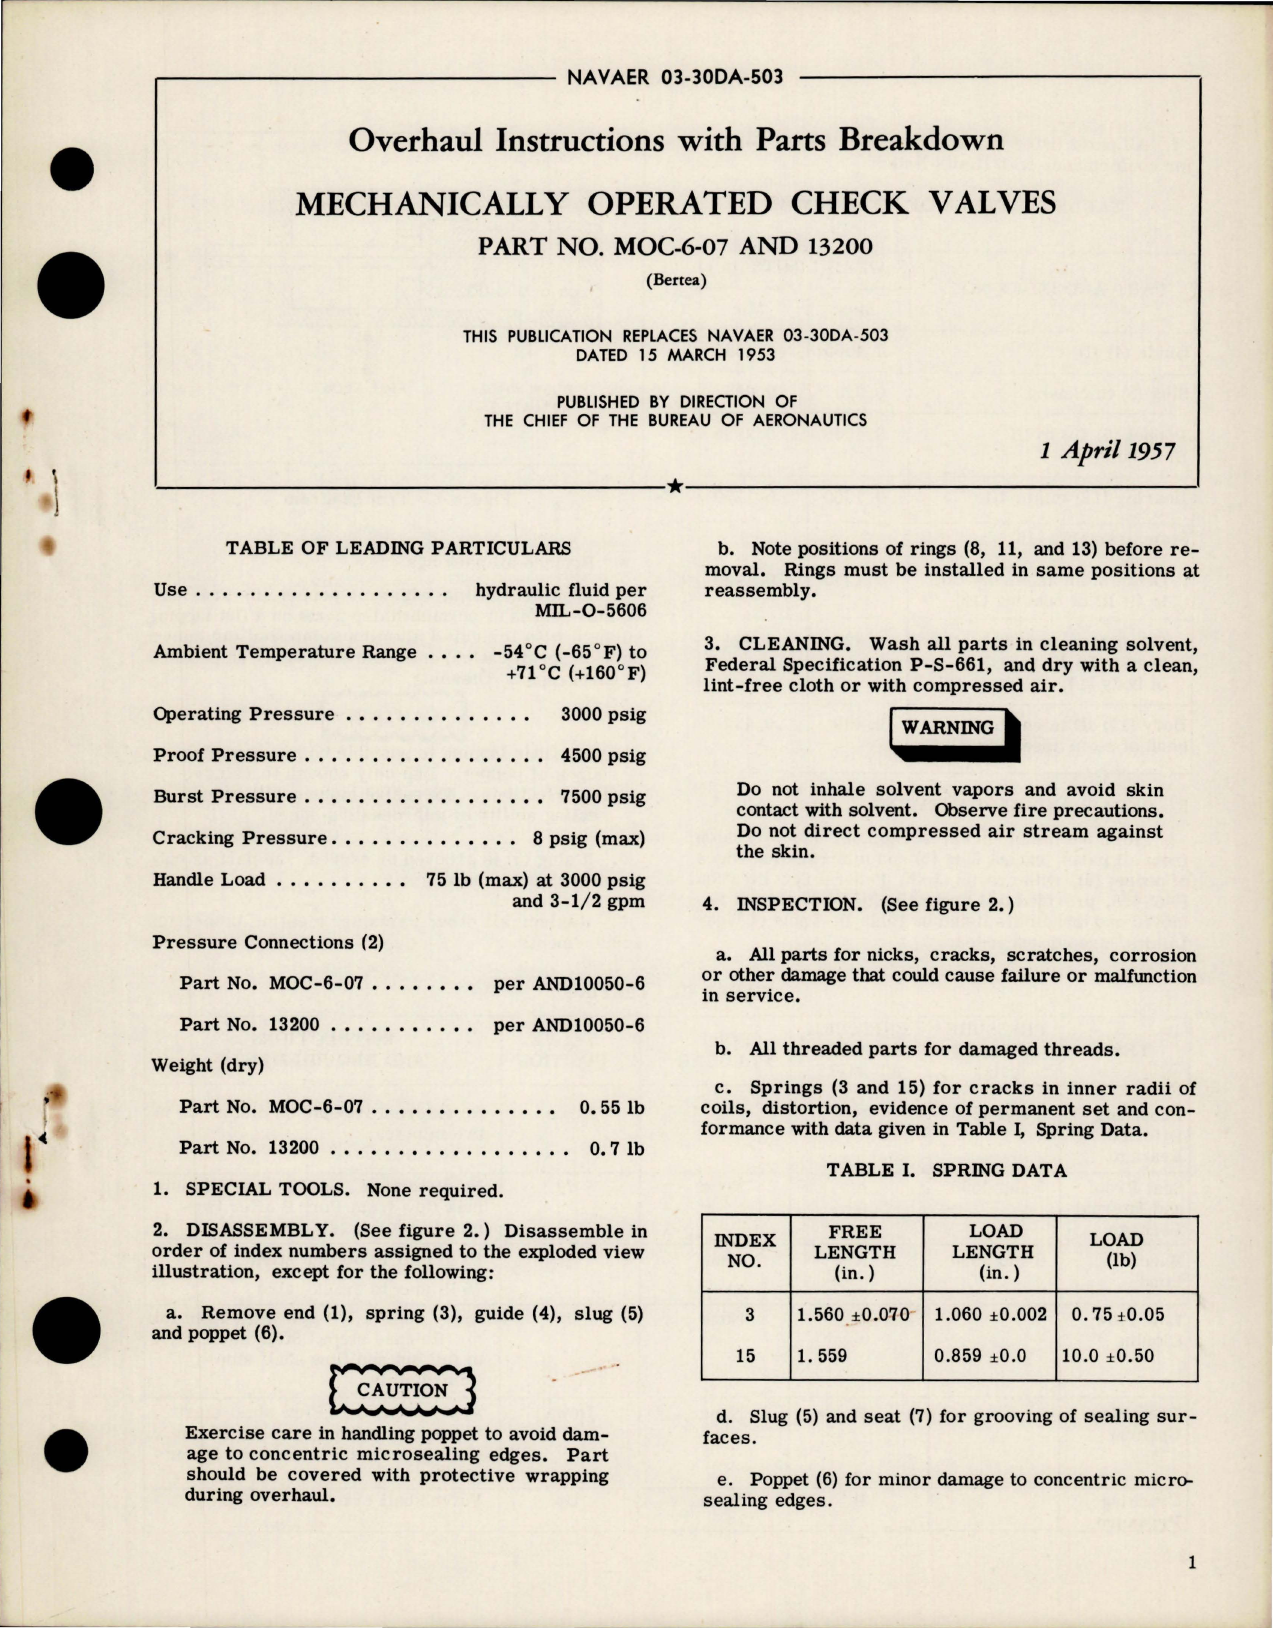 Sample page 1 from AirCorps Library document: Overhaul Instructions with Parts for Mechanically Operated Check Valves - Part MOC-6-07 and 13200